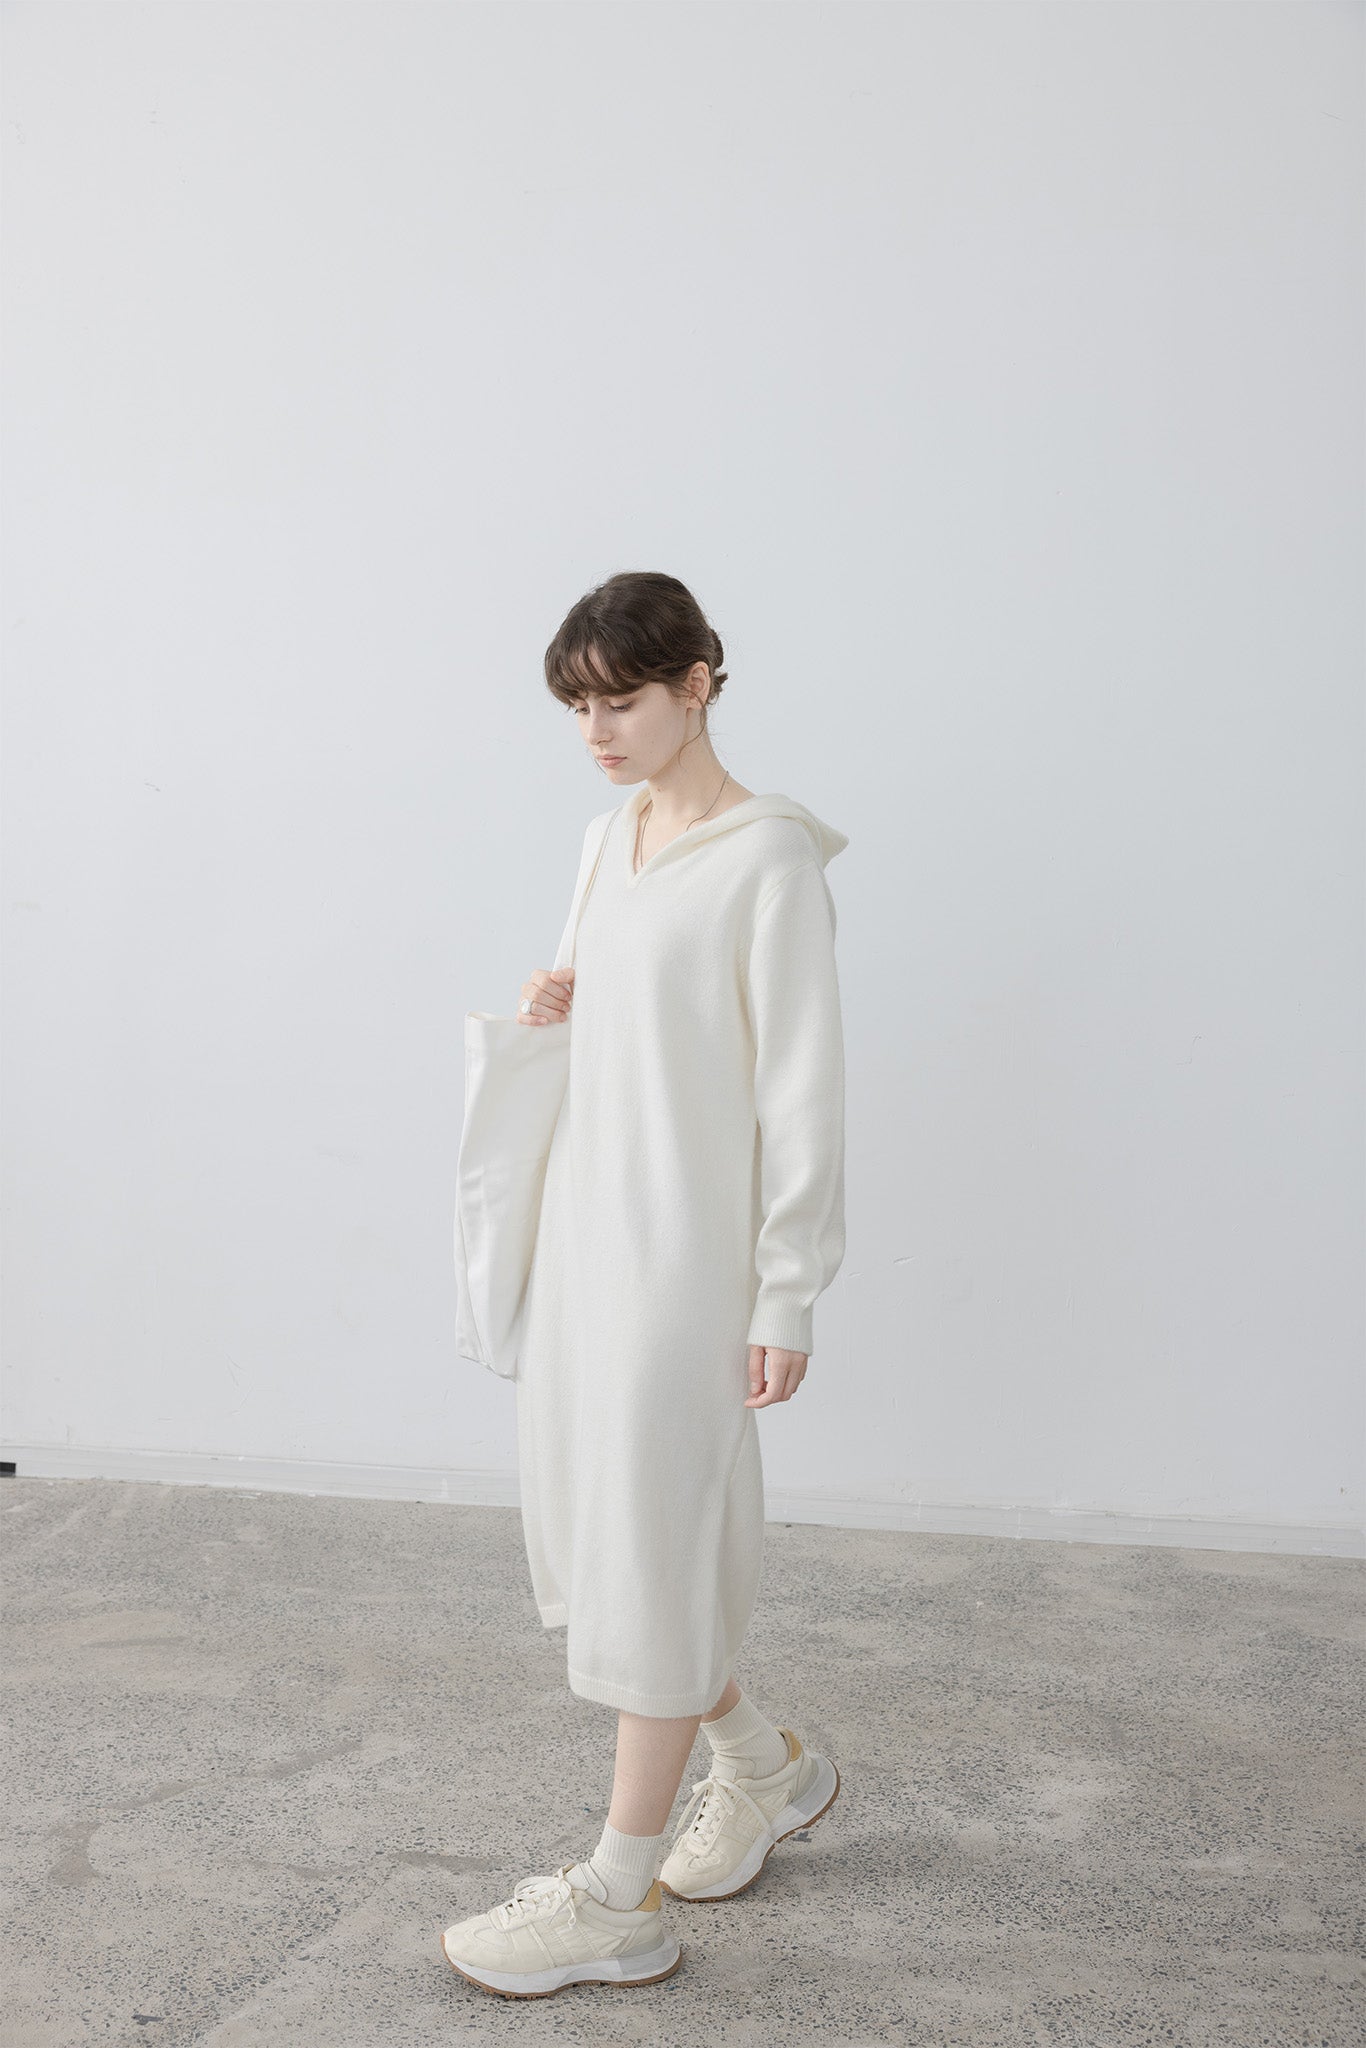 Loose silhouette hooded knit tight long dress 